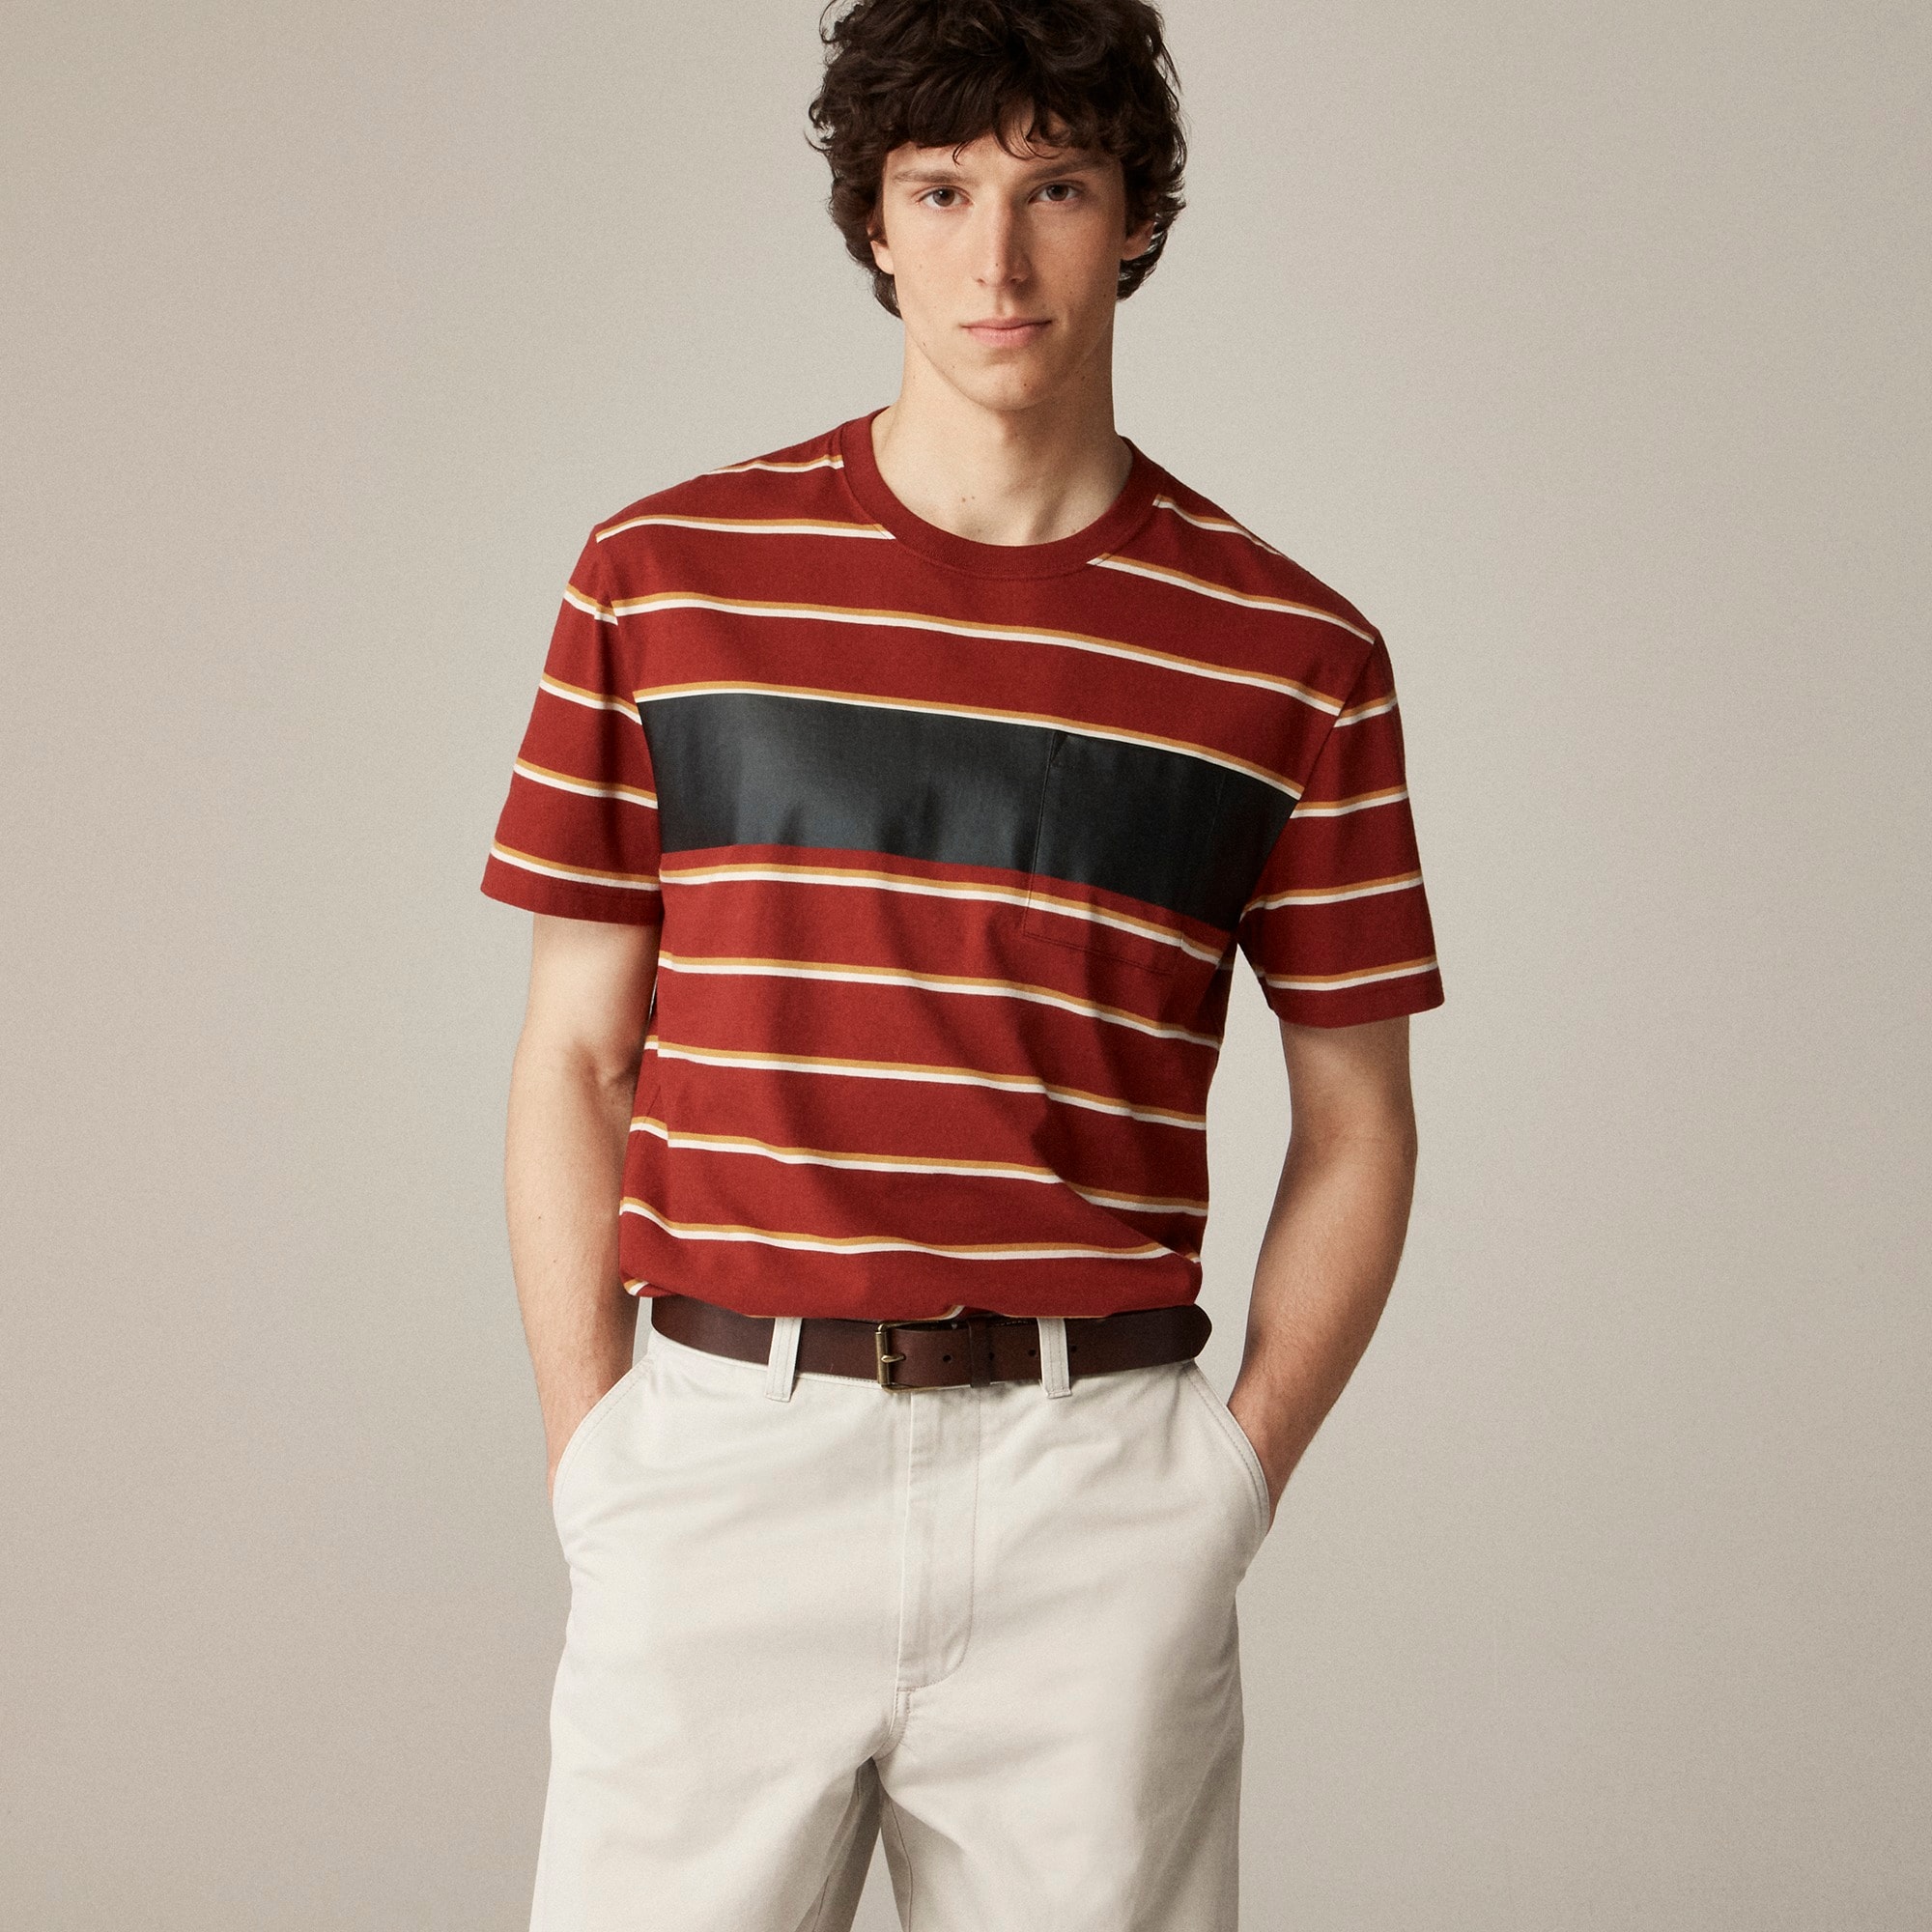  BEAMS PLUS X J.Crew striped T-shirt with applied detail